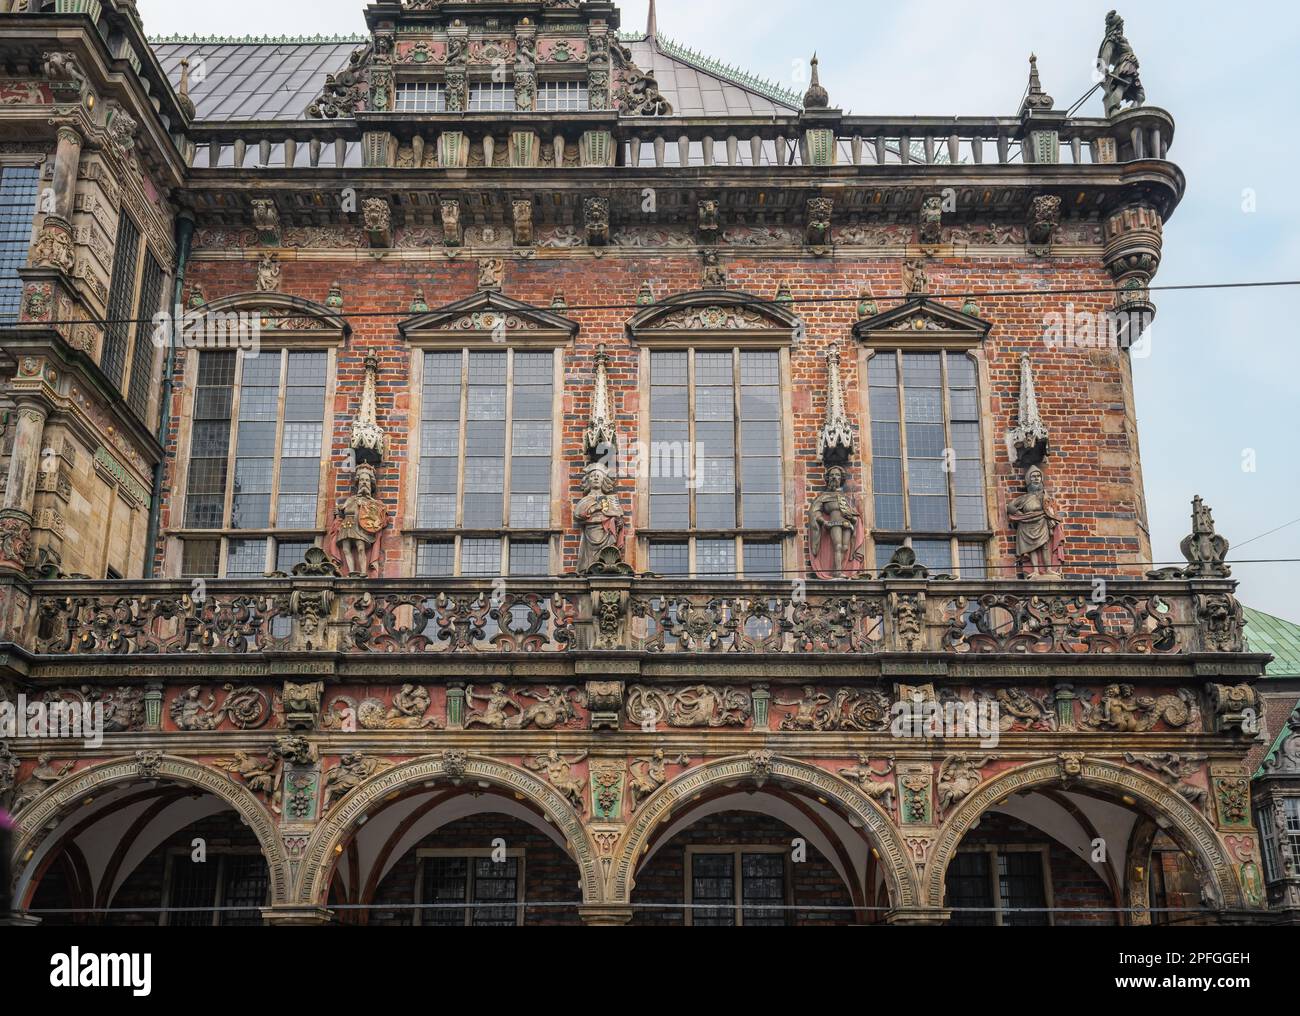 Old Town Hall Facade at Market Square - Bremen, Germany Stock Photo